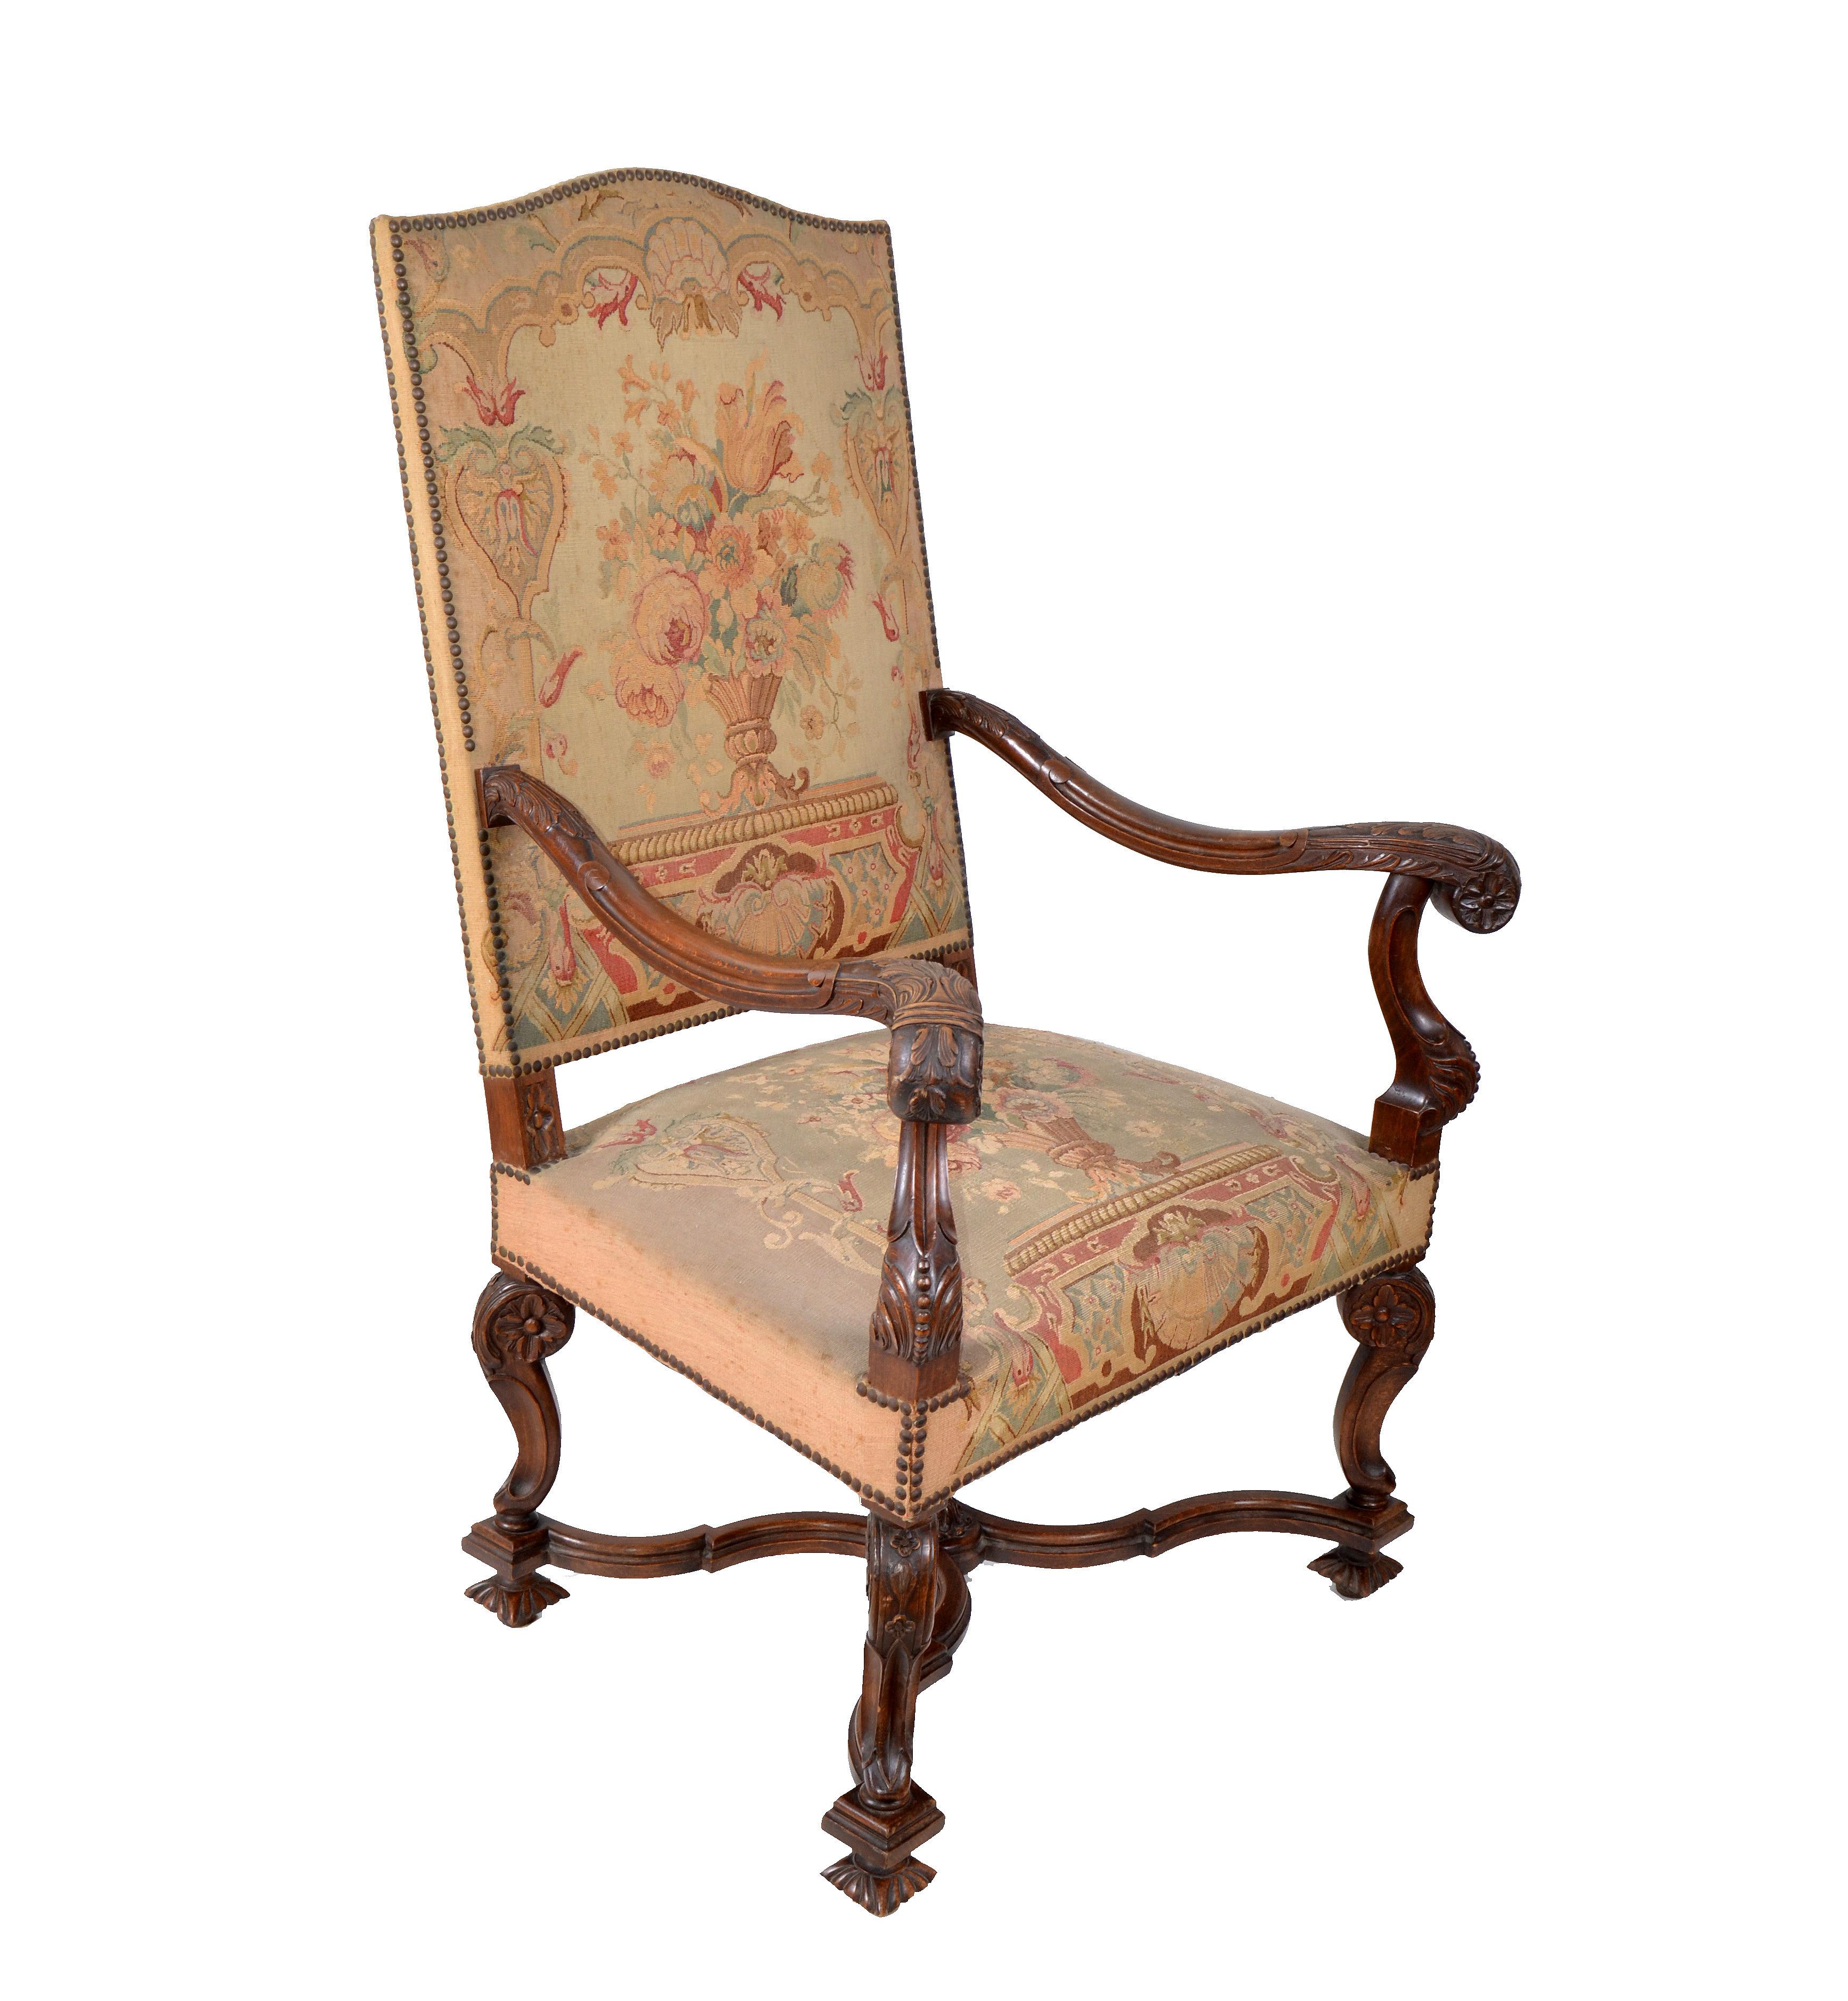 Italian one of a kind hand carved Armchair from the 17th century.
Sturdy and comfortable crafted frame with decorative cross base and beautiful carved wood details.
Nailhead trim adorn the handmade needlepoint upholstered seat and chair